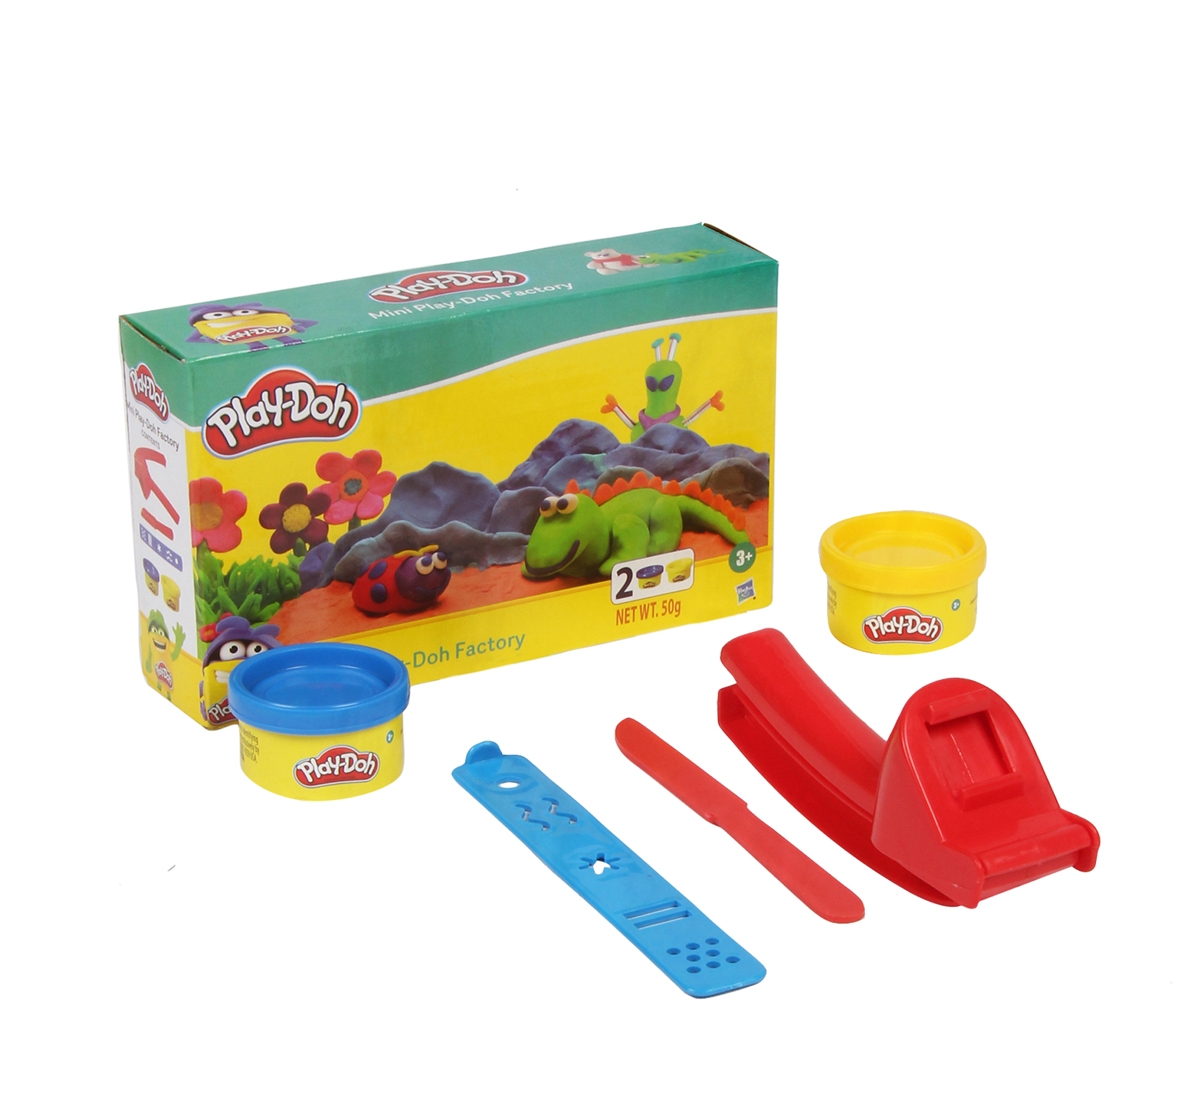 Play-Doh | Play Doh Mini Fun Factory Toolset for Kids 3Y+, Multicolour